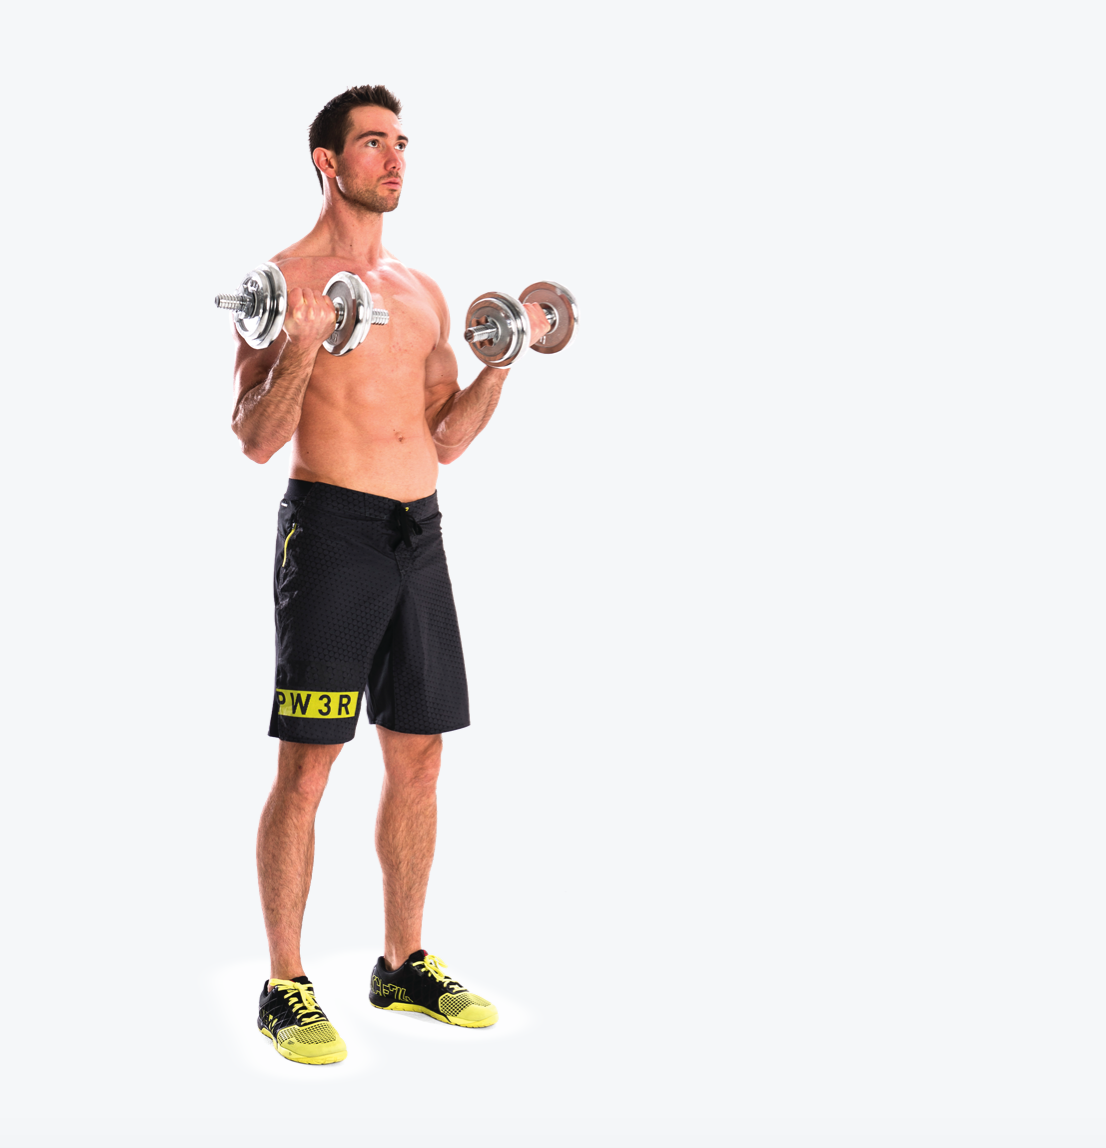 Best Dumbbell Exercises for Arms and Shoulders